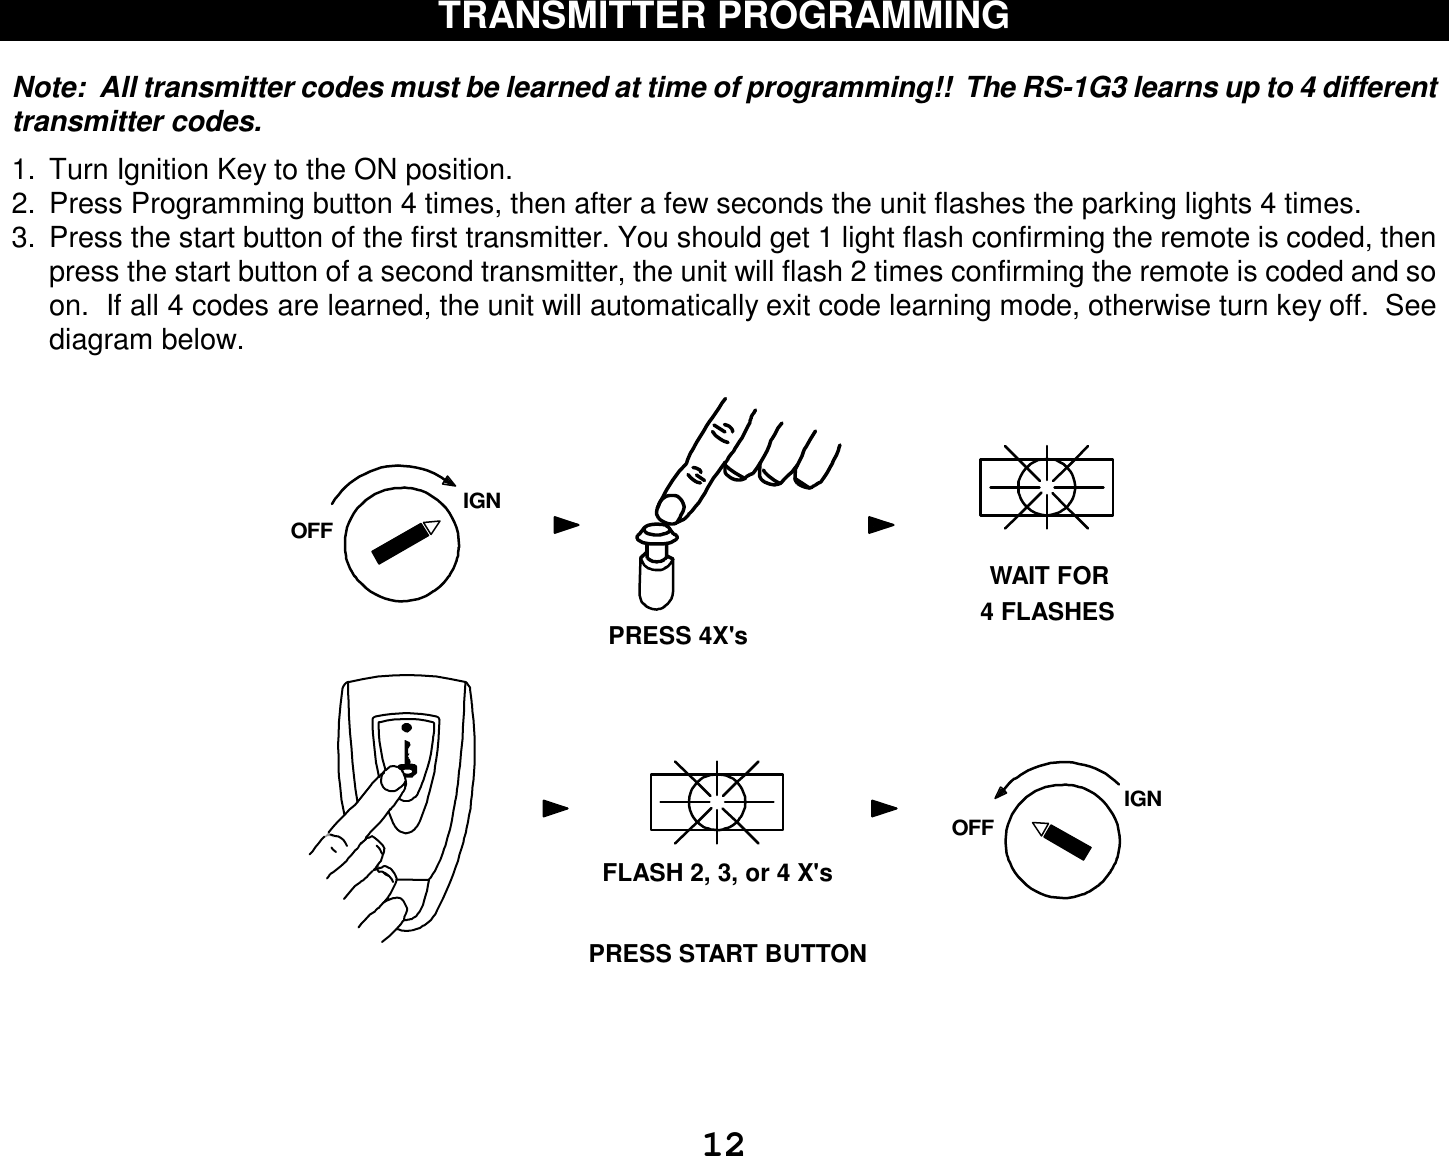  12 TRANSMITTER PROGRAMMING   Note:  All transmitter codes must be learned at time of programming!!  The RS-1G3 learns up to 4 different transmitter codes.    1. Turn Ignition Key to the ON position.  2. Press Programming button 4 times, then after a few seconds the unit flashes the parking lights 4 times. 3. Press the start button of the first transmitter. You should get 1 light flash confirming the remote is coded, then press the start button of a second transmitter, the unit will flash 2 times confirming the remote is coded and so on.  If all 4 codes are learned, the unit will automatically exit code learning mode, otherwise turn key off.  See diagram below.                                            IGNOFFWAIT FOR4 FLASHESPRESS 4X&apos;sFLASH 2, 3, or 4 X&apos;sIGNOFFPRESS START BUTTON     